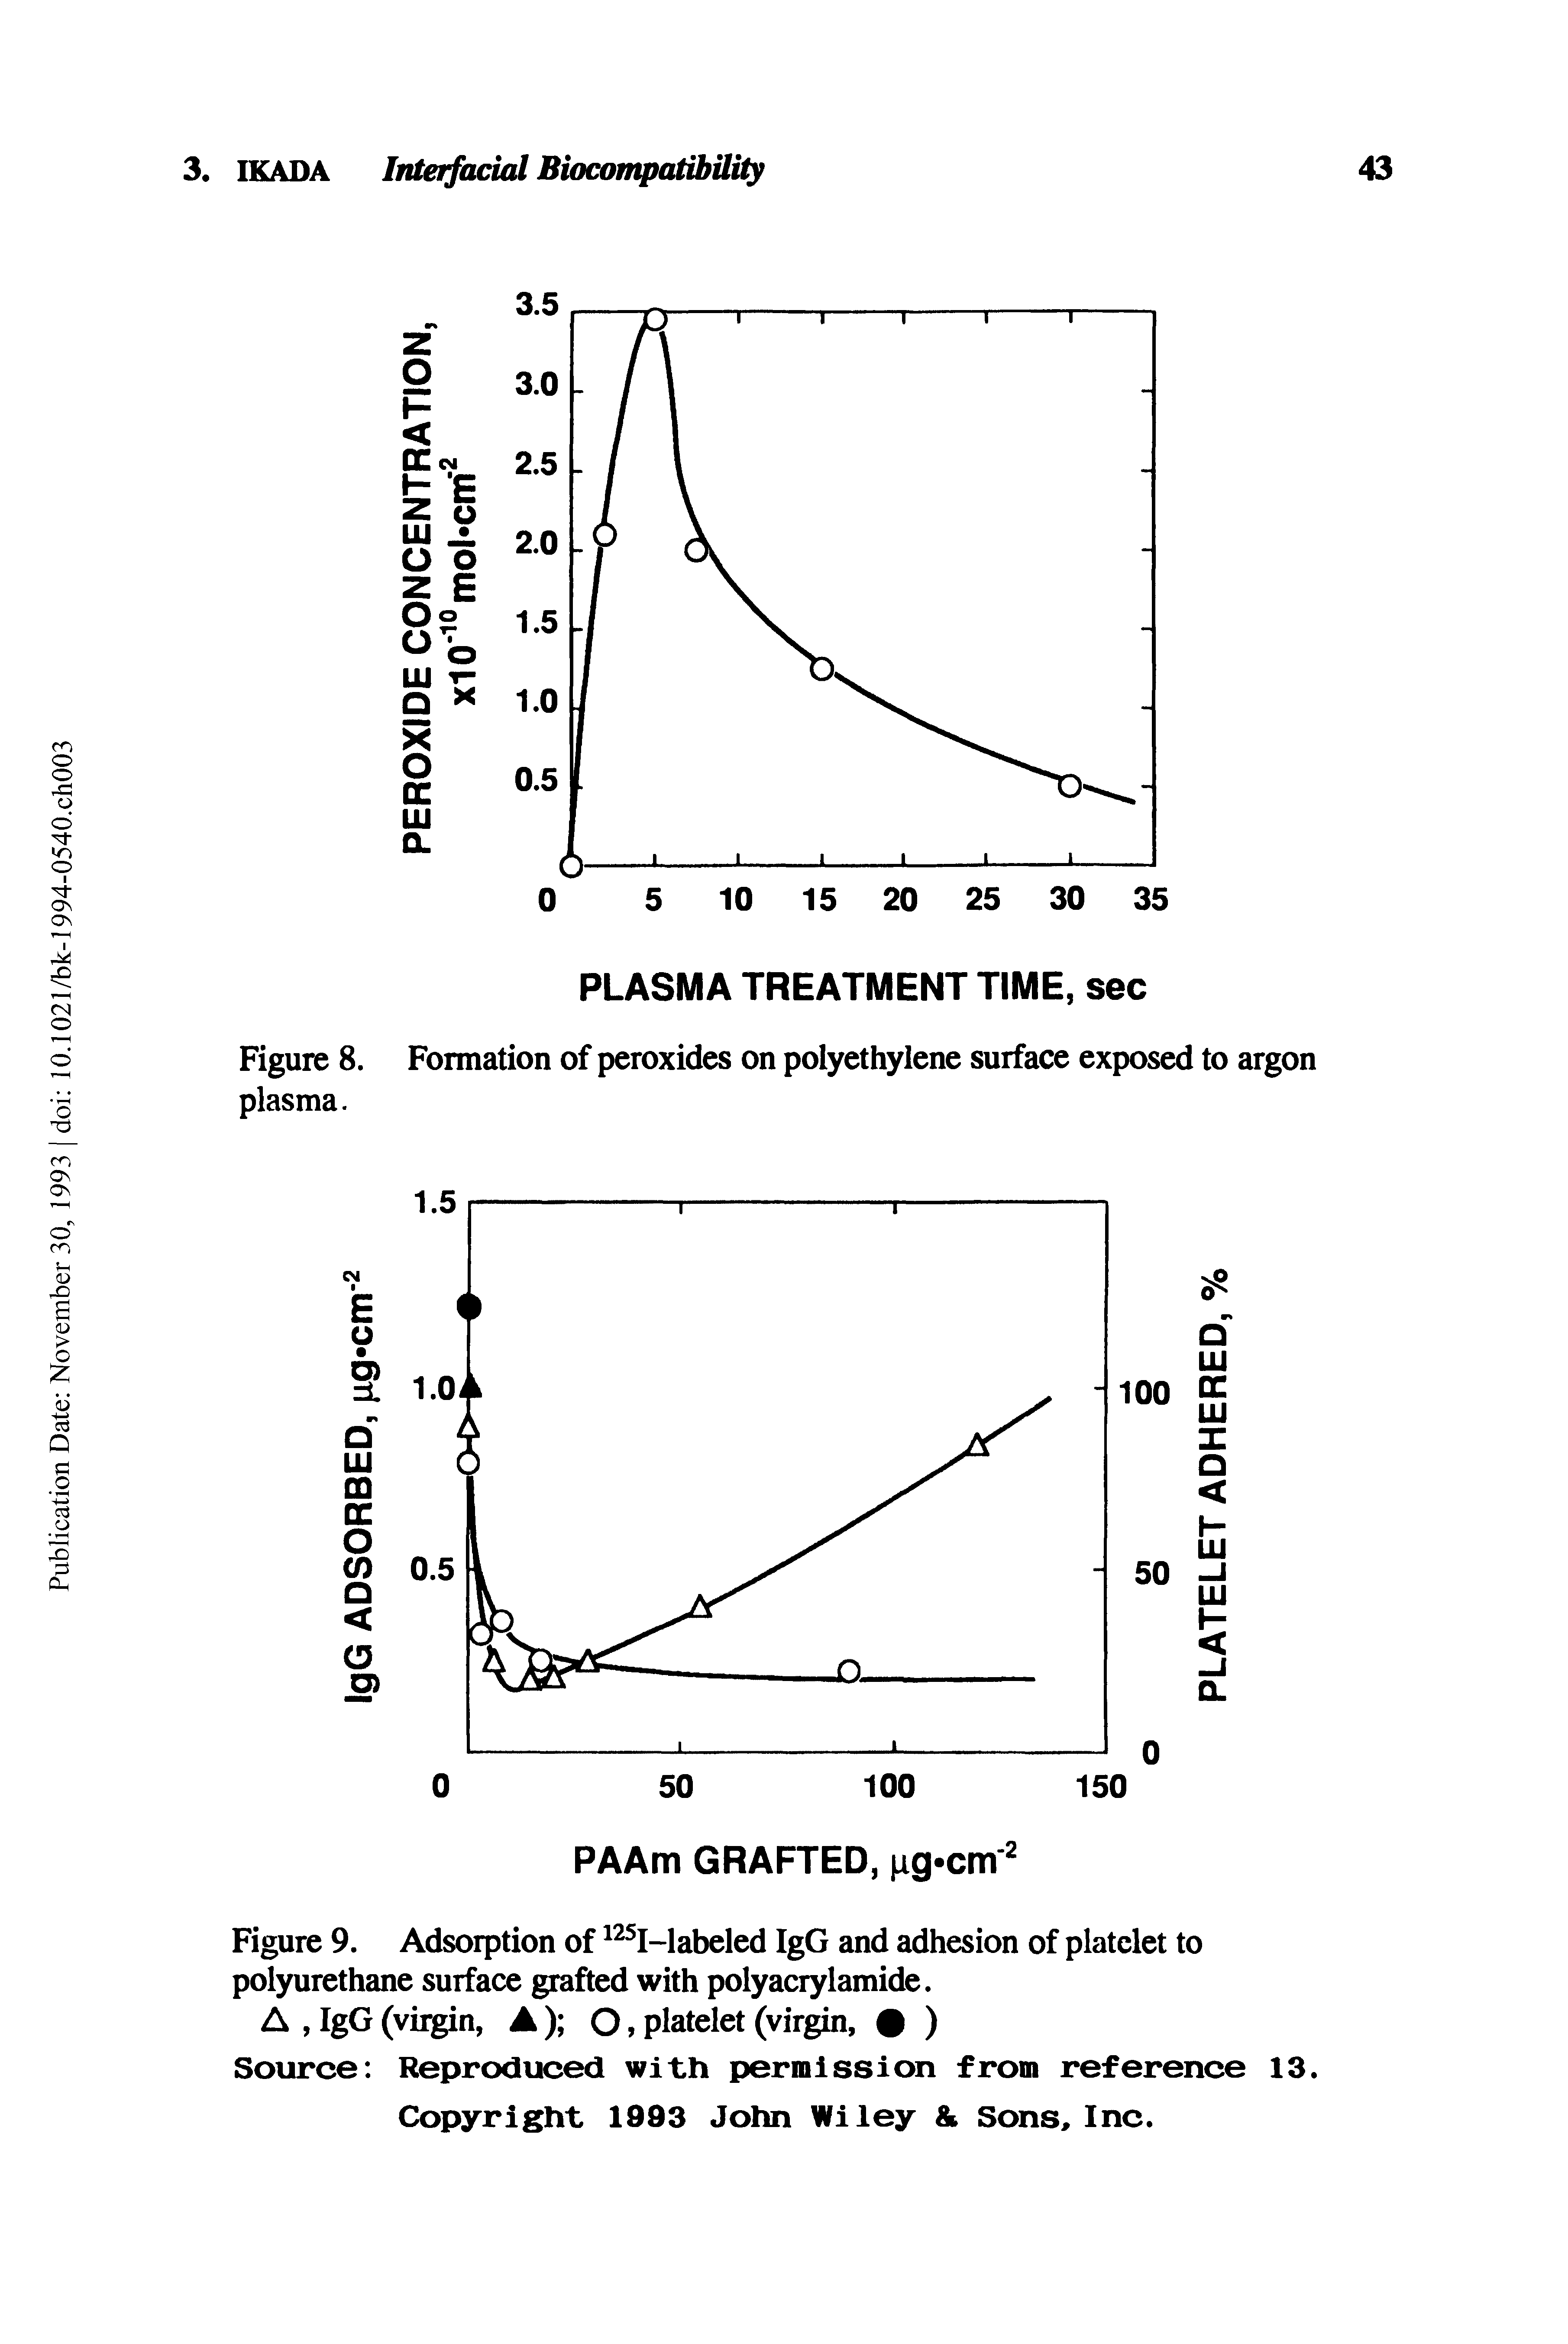 Figure 9. Adsorption of I-labeled IgG and adhesion of platelet to polyurethane surface grafted with polyacrylamide.